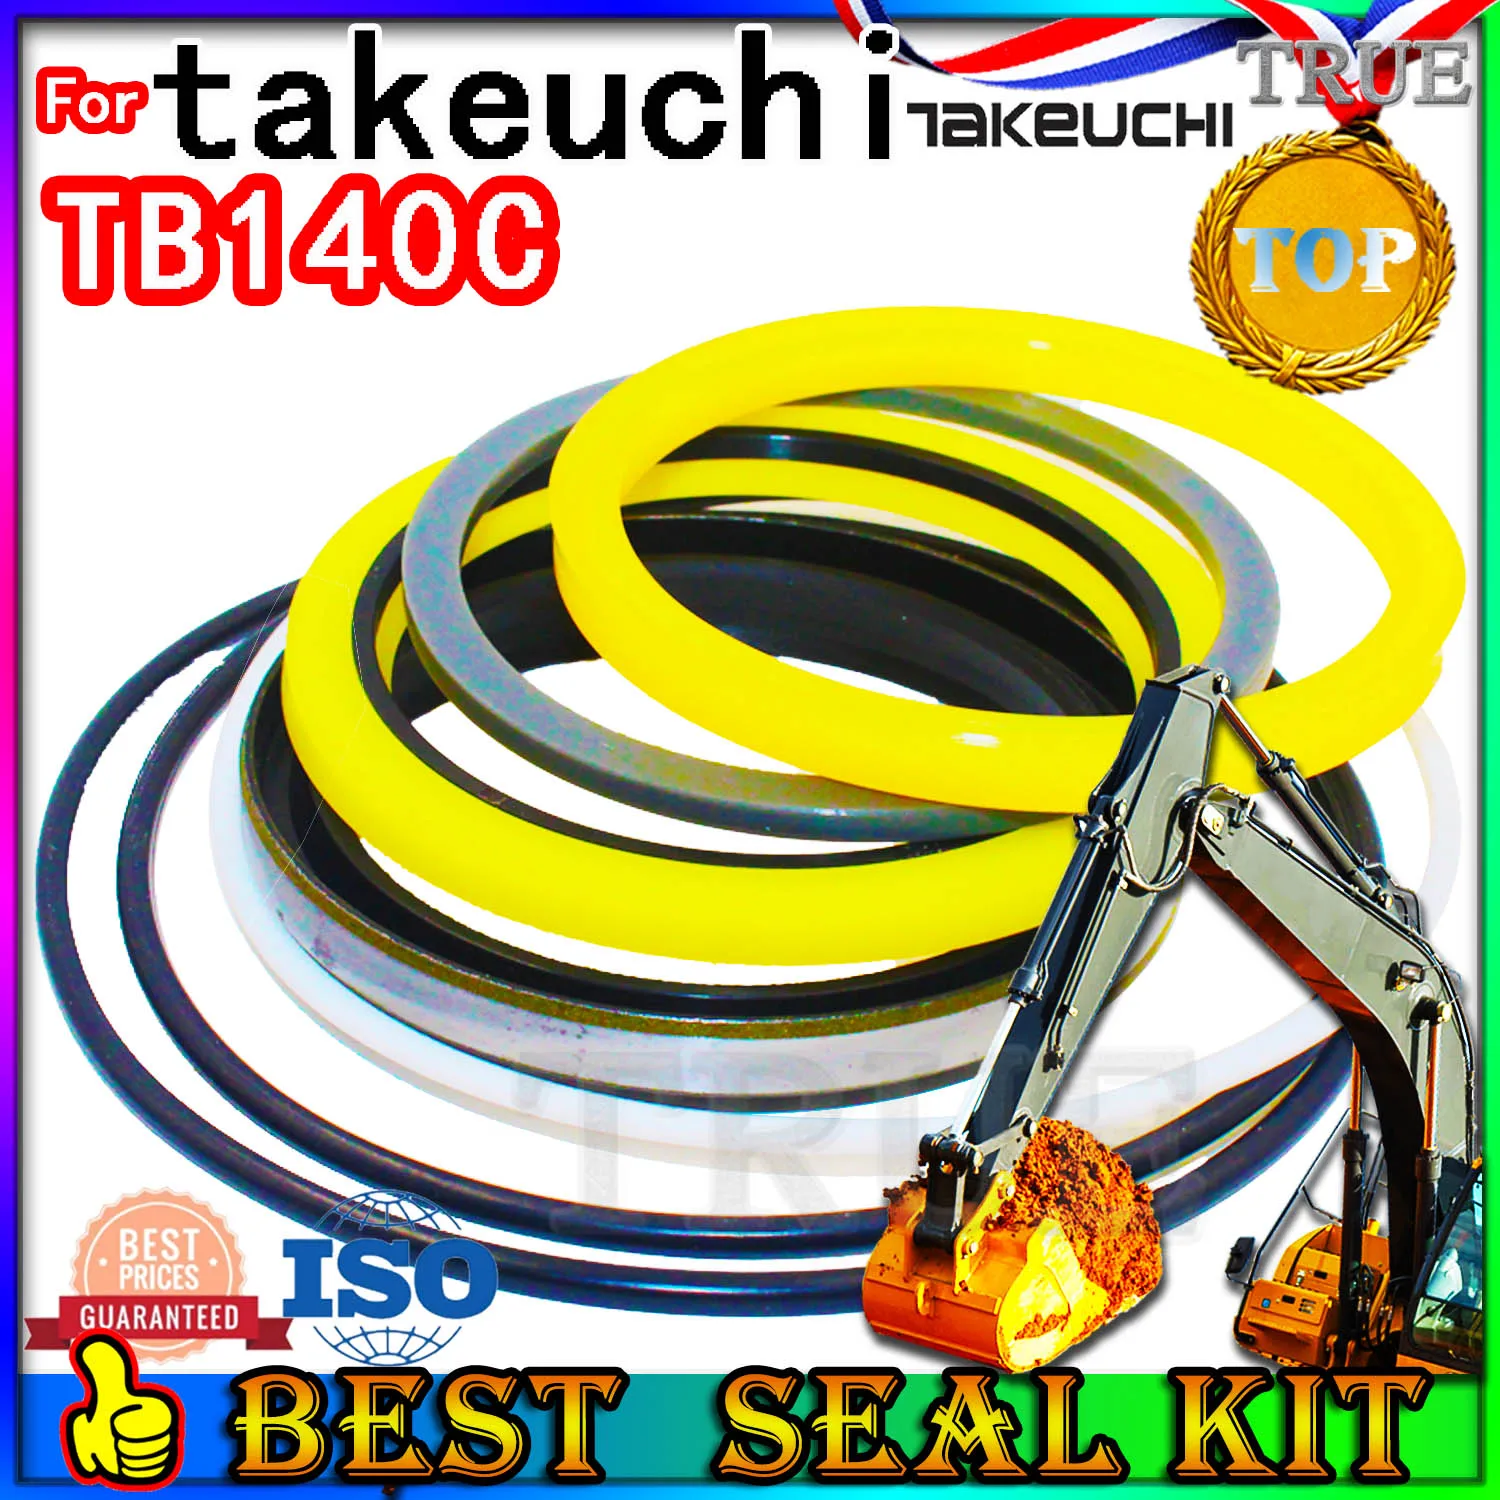 

For TAKEUCHI TB140C Oil Seal Repair Kit Boom Arm Bucket Excavator Hydraulic Cylinder Fix Best Reliable Mend proof Center Swivel